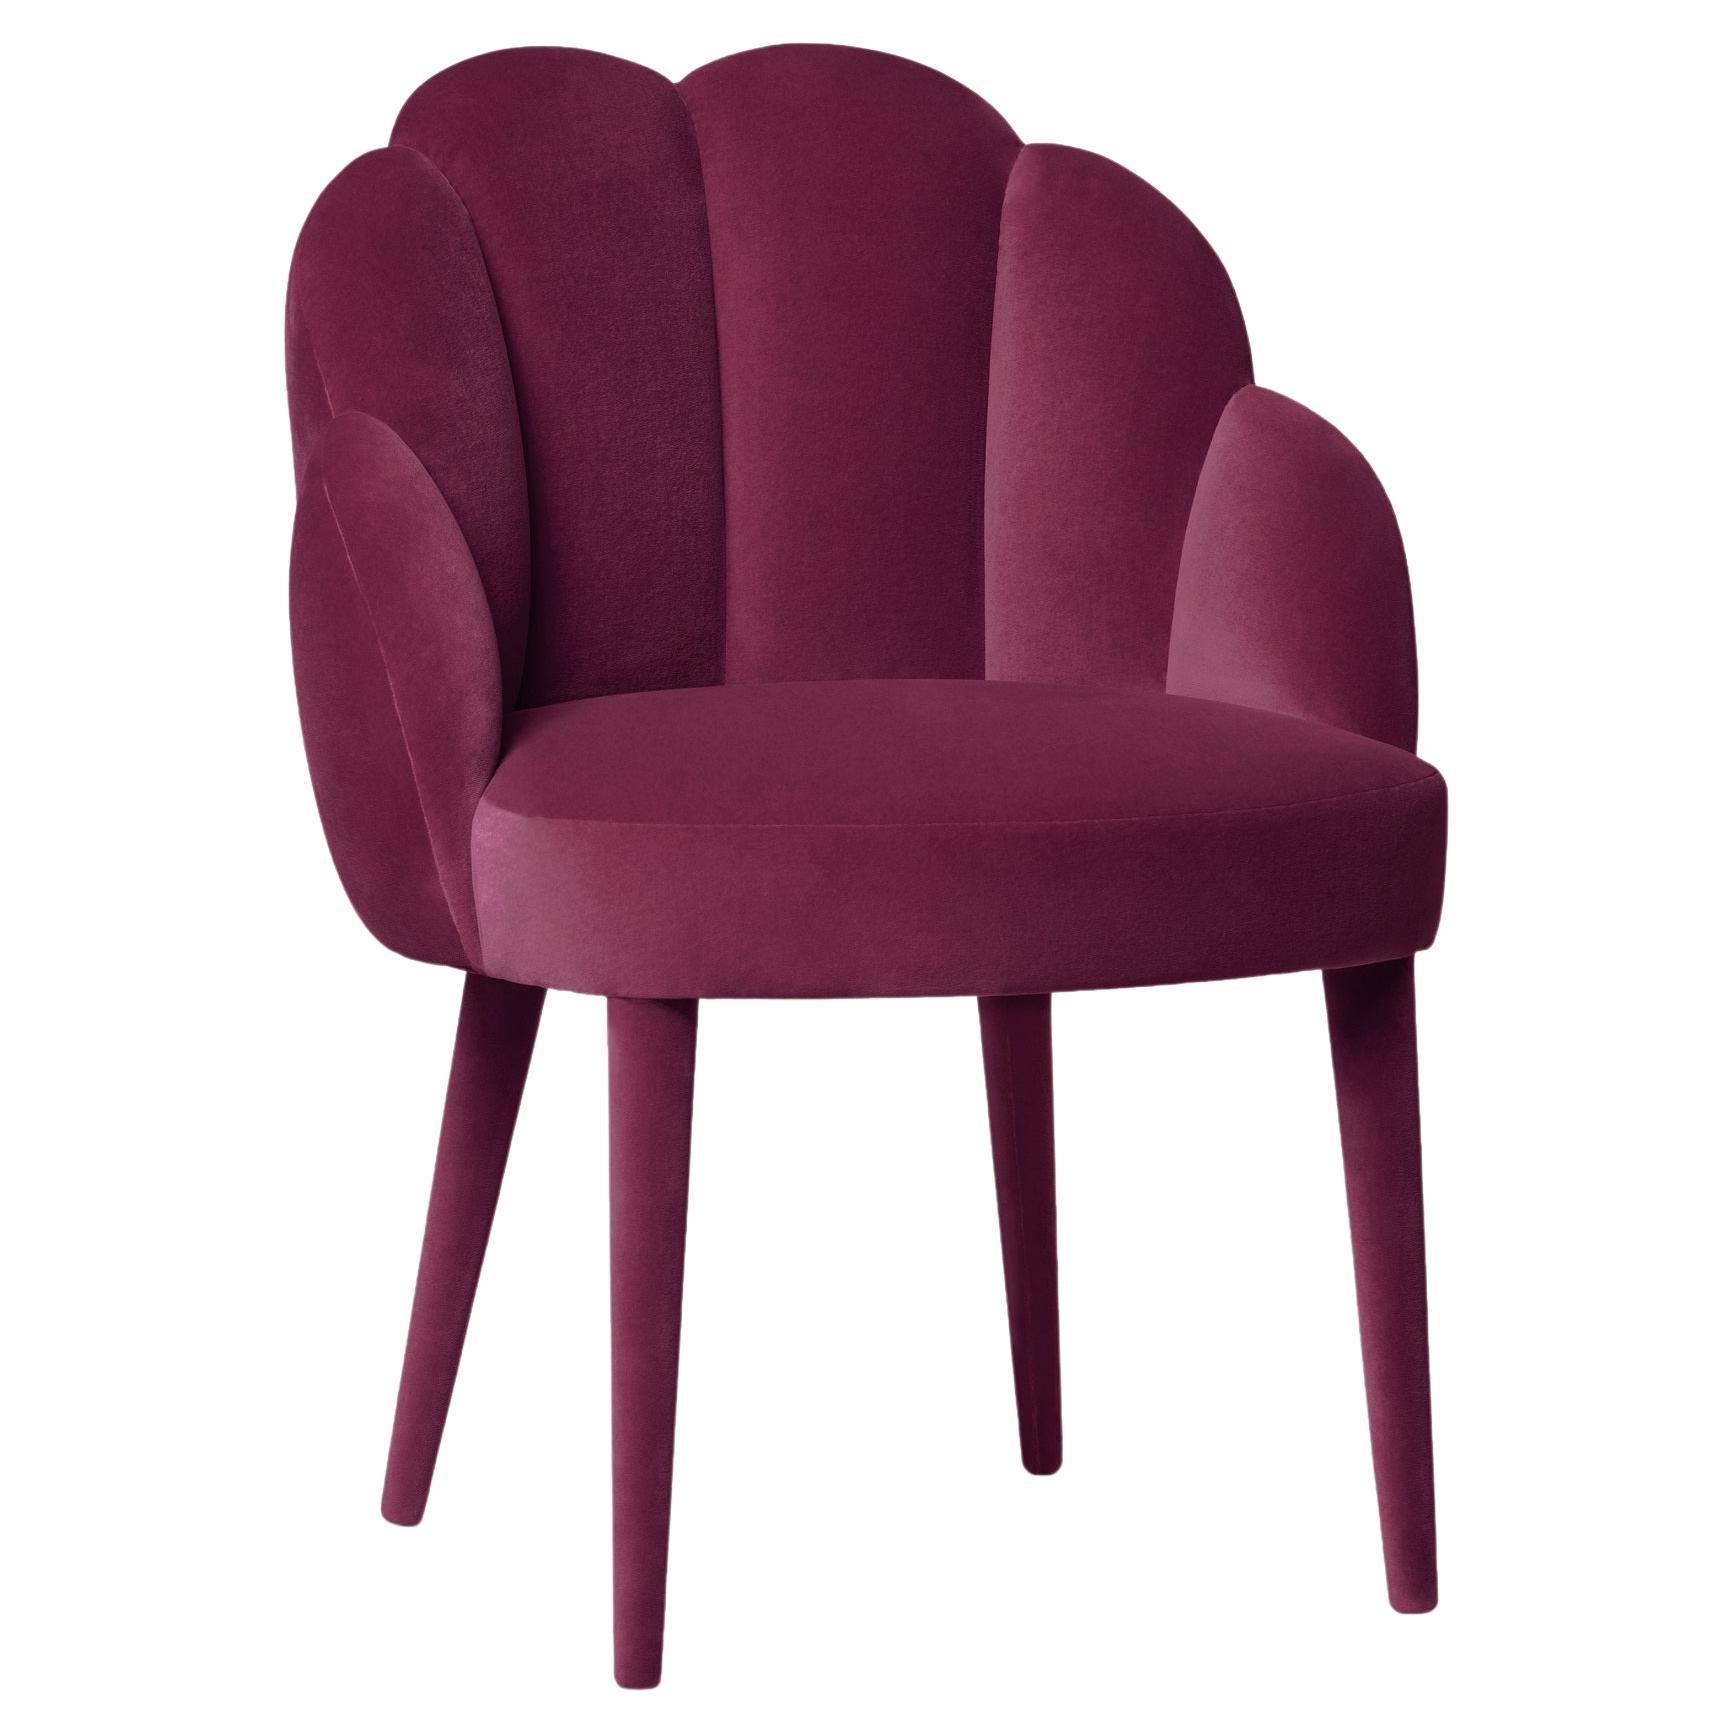 Modern Contemporary Dining Chair Offered in Velvet For Sale